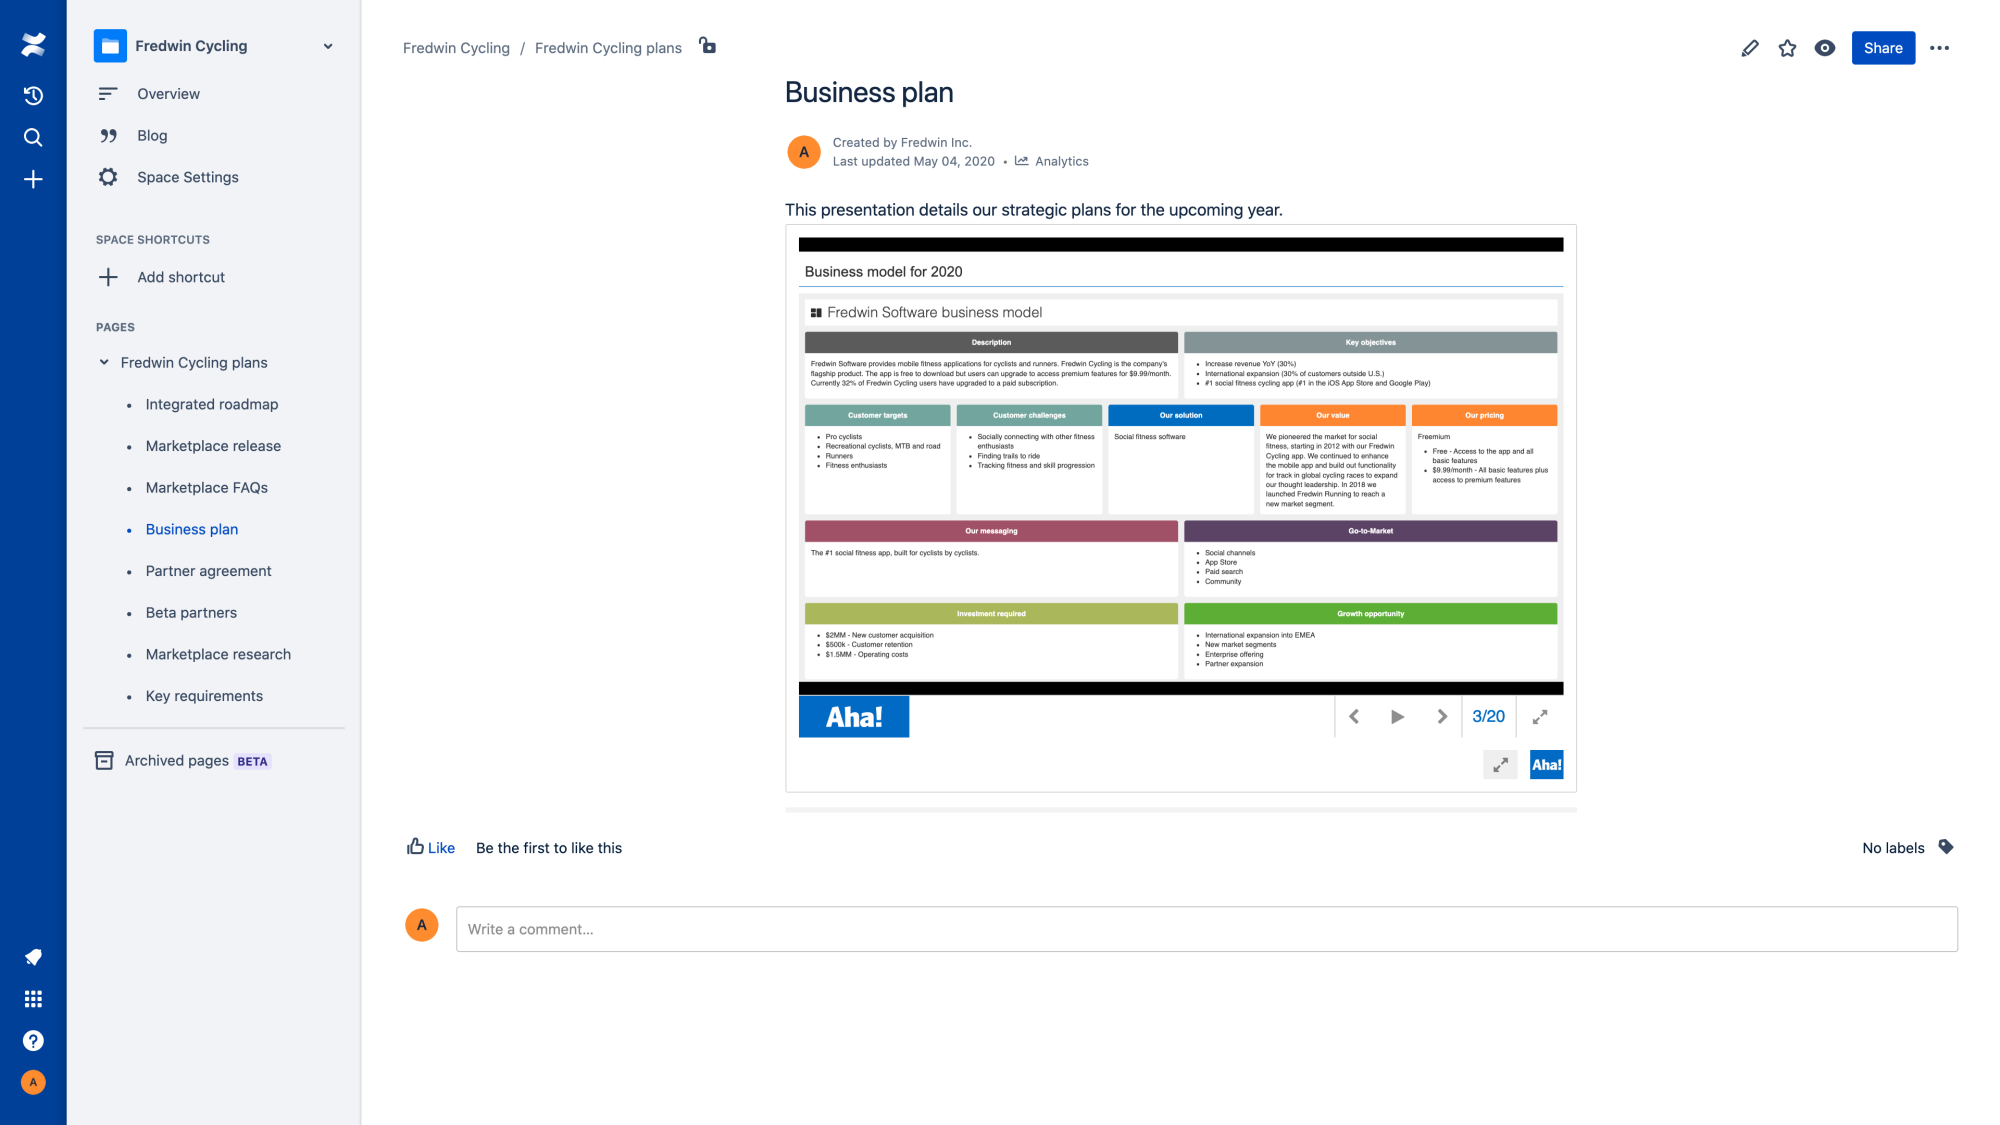 Embed Aha! presentations in Confluence